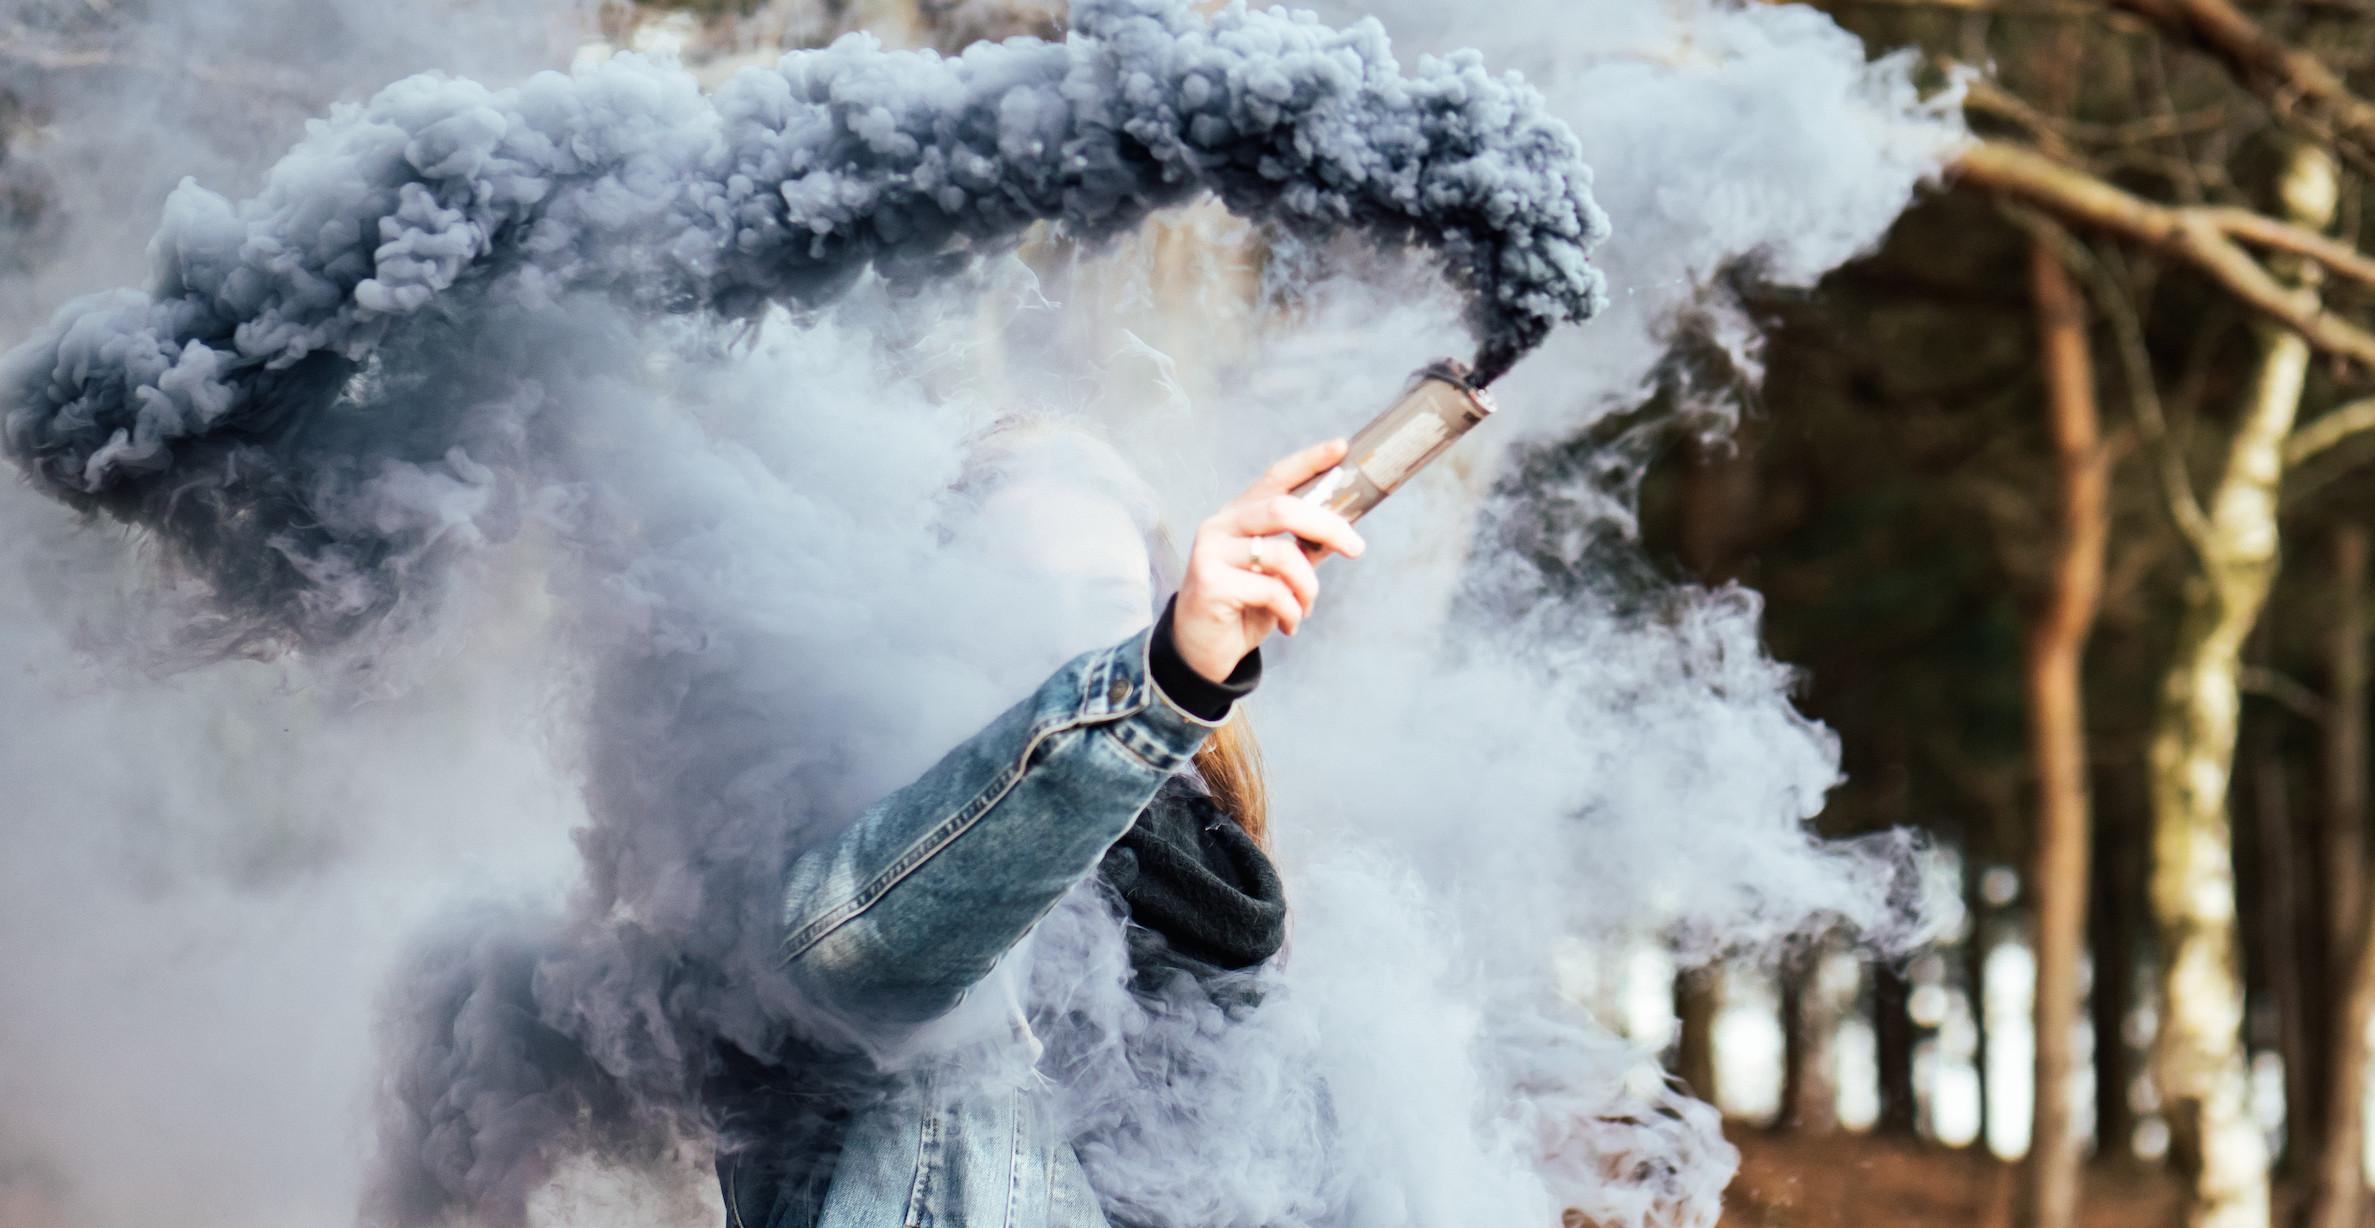 person creating smoke with handheld device